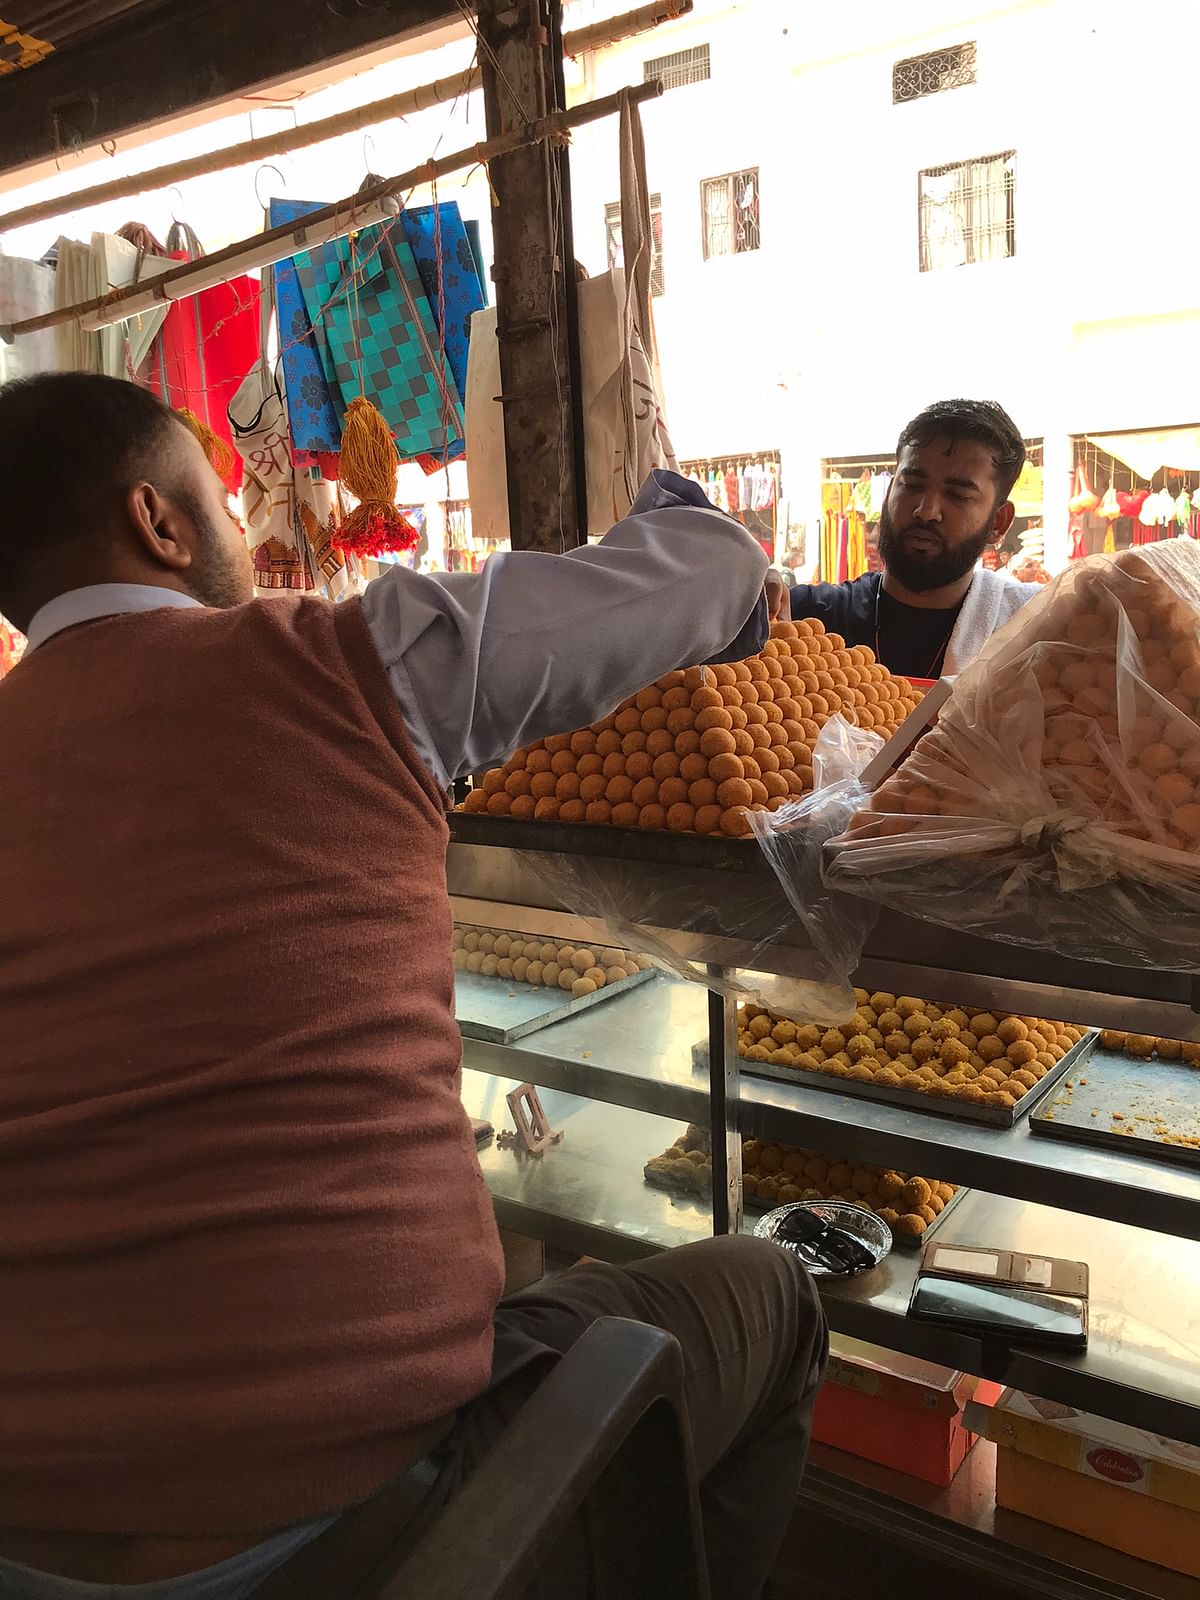 Sunil Gupta owns a laddoo shop in close proximity to the Hanuman Garhi temple. He suffered a significant loss of land during the acquisition process, and although the laddoos may receive a GI tag, the future of his business hangs in the balance if the rest of the shop is also acquired.